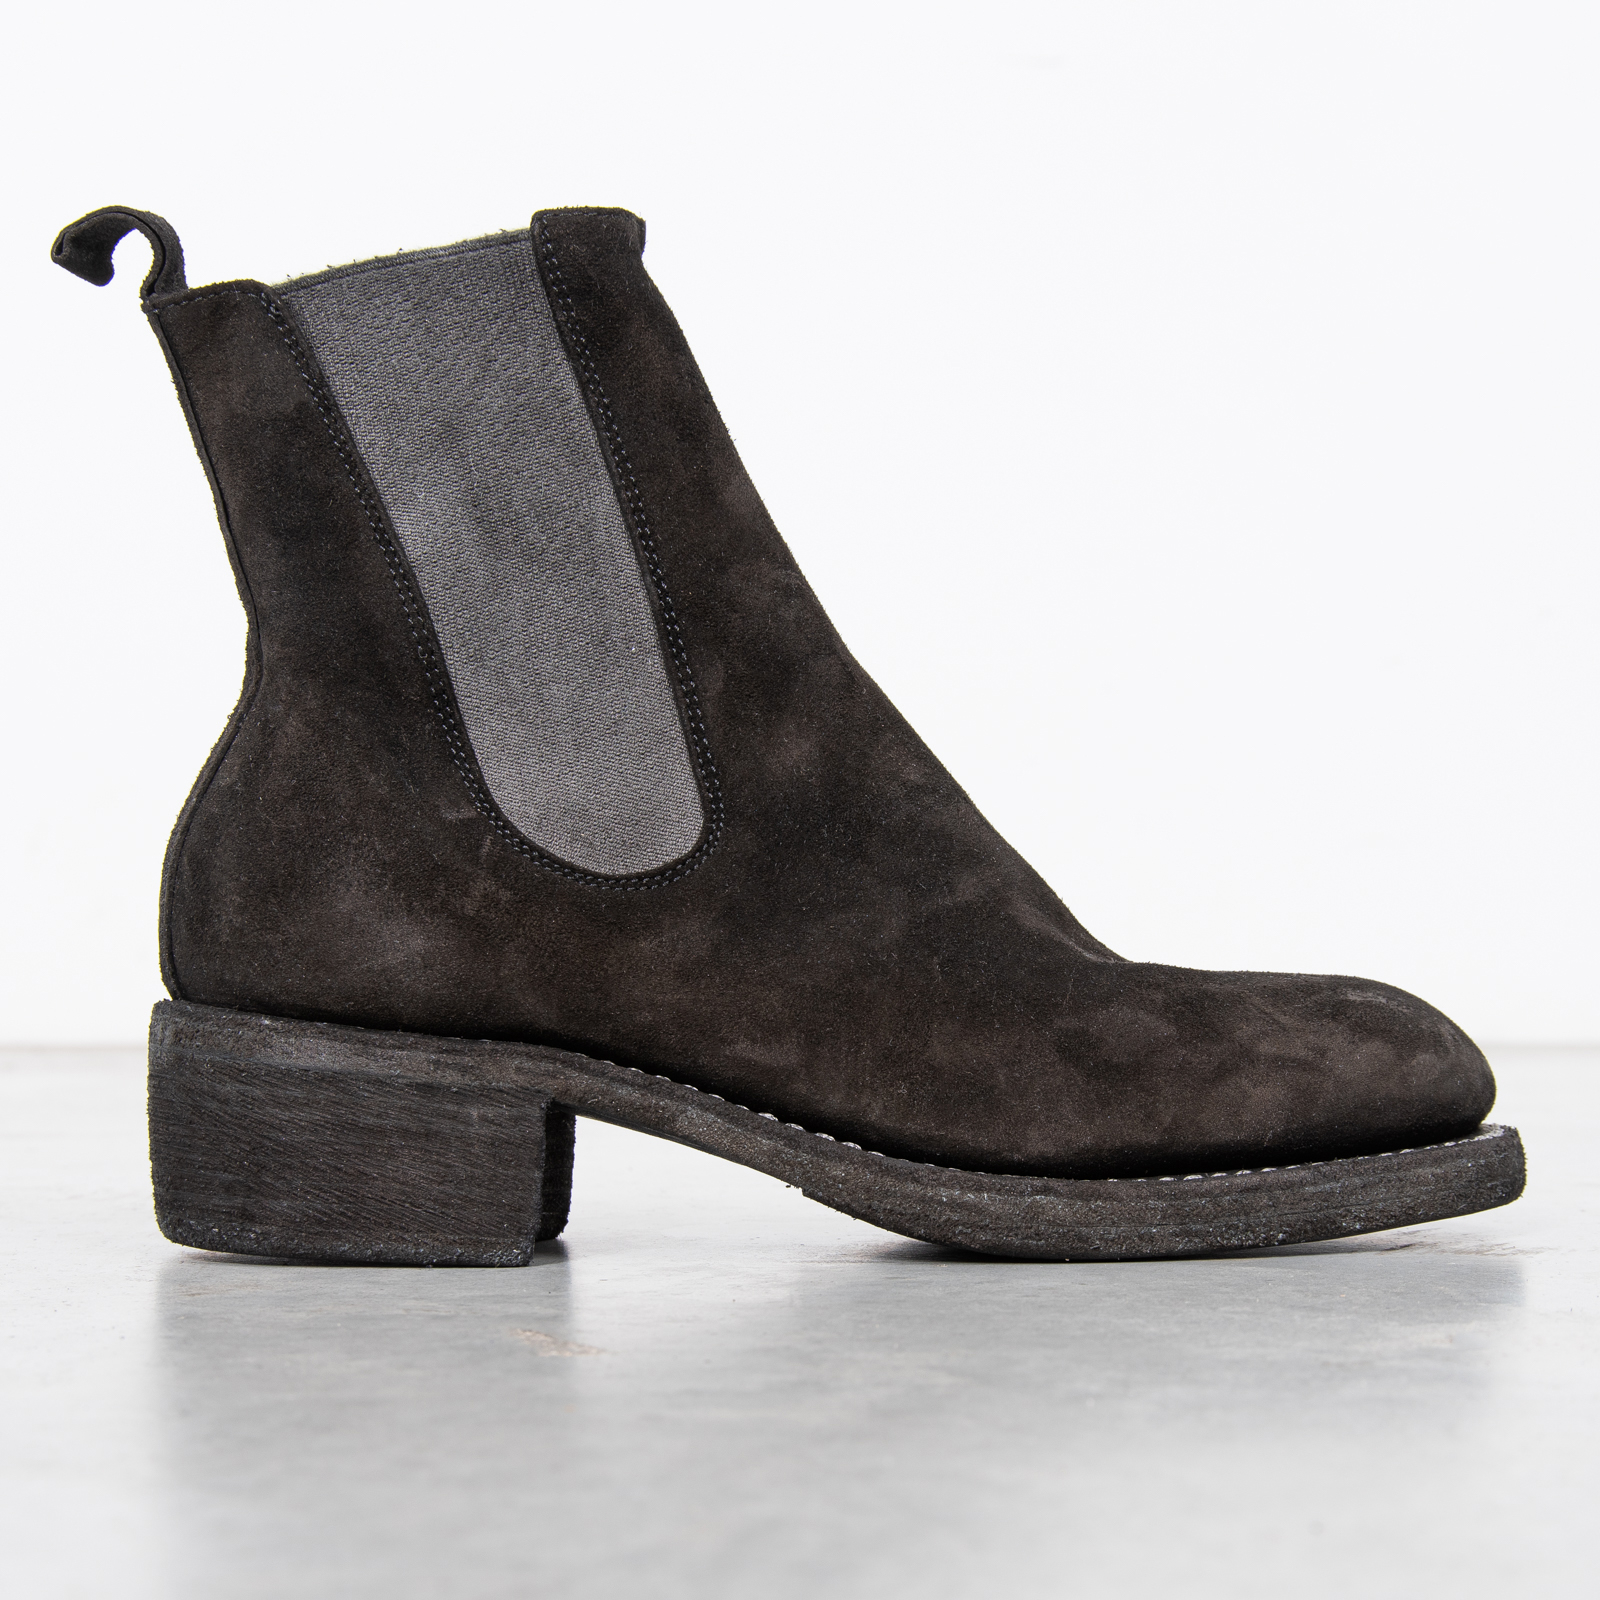 Selected Louis chelsea boots in black suede